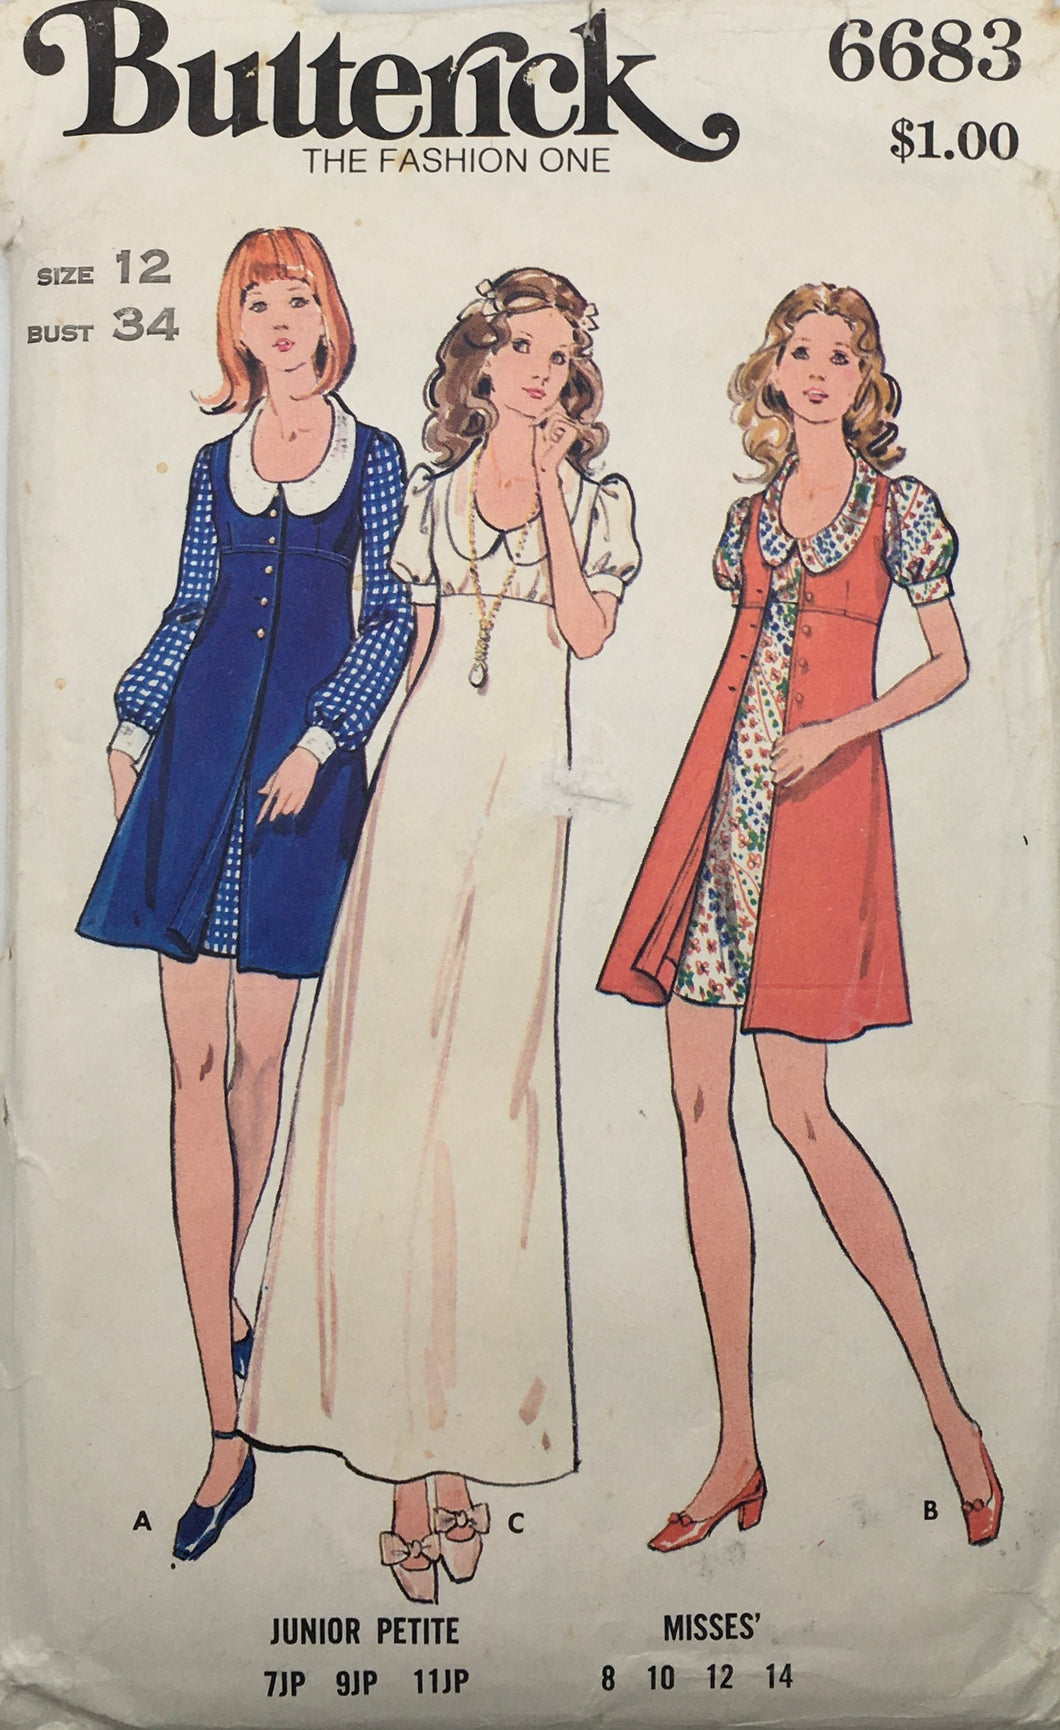 1970's Vintage Sewing Pattern: Butterick 6683